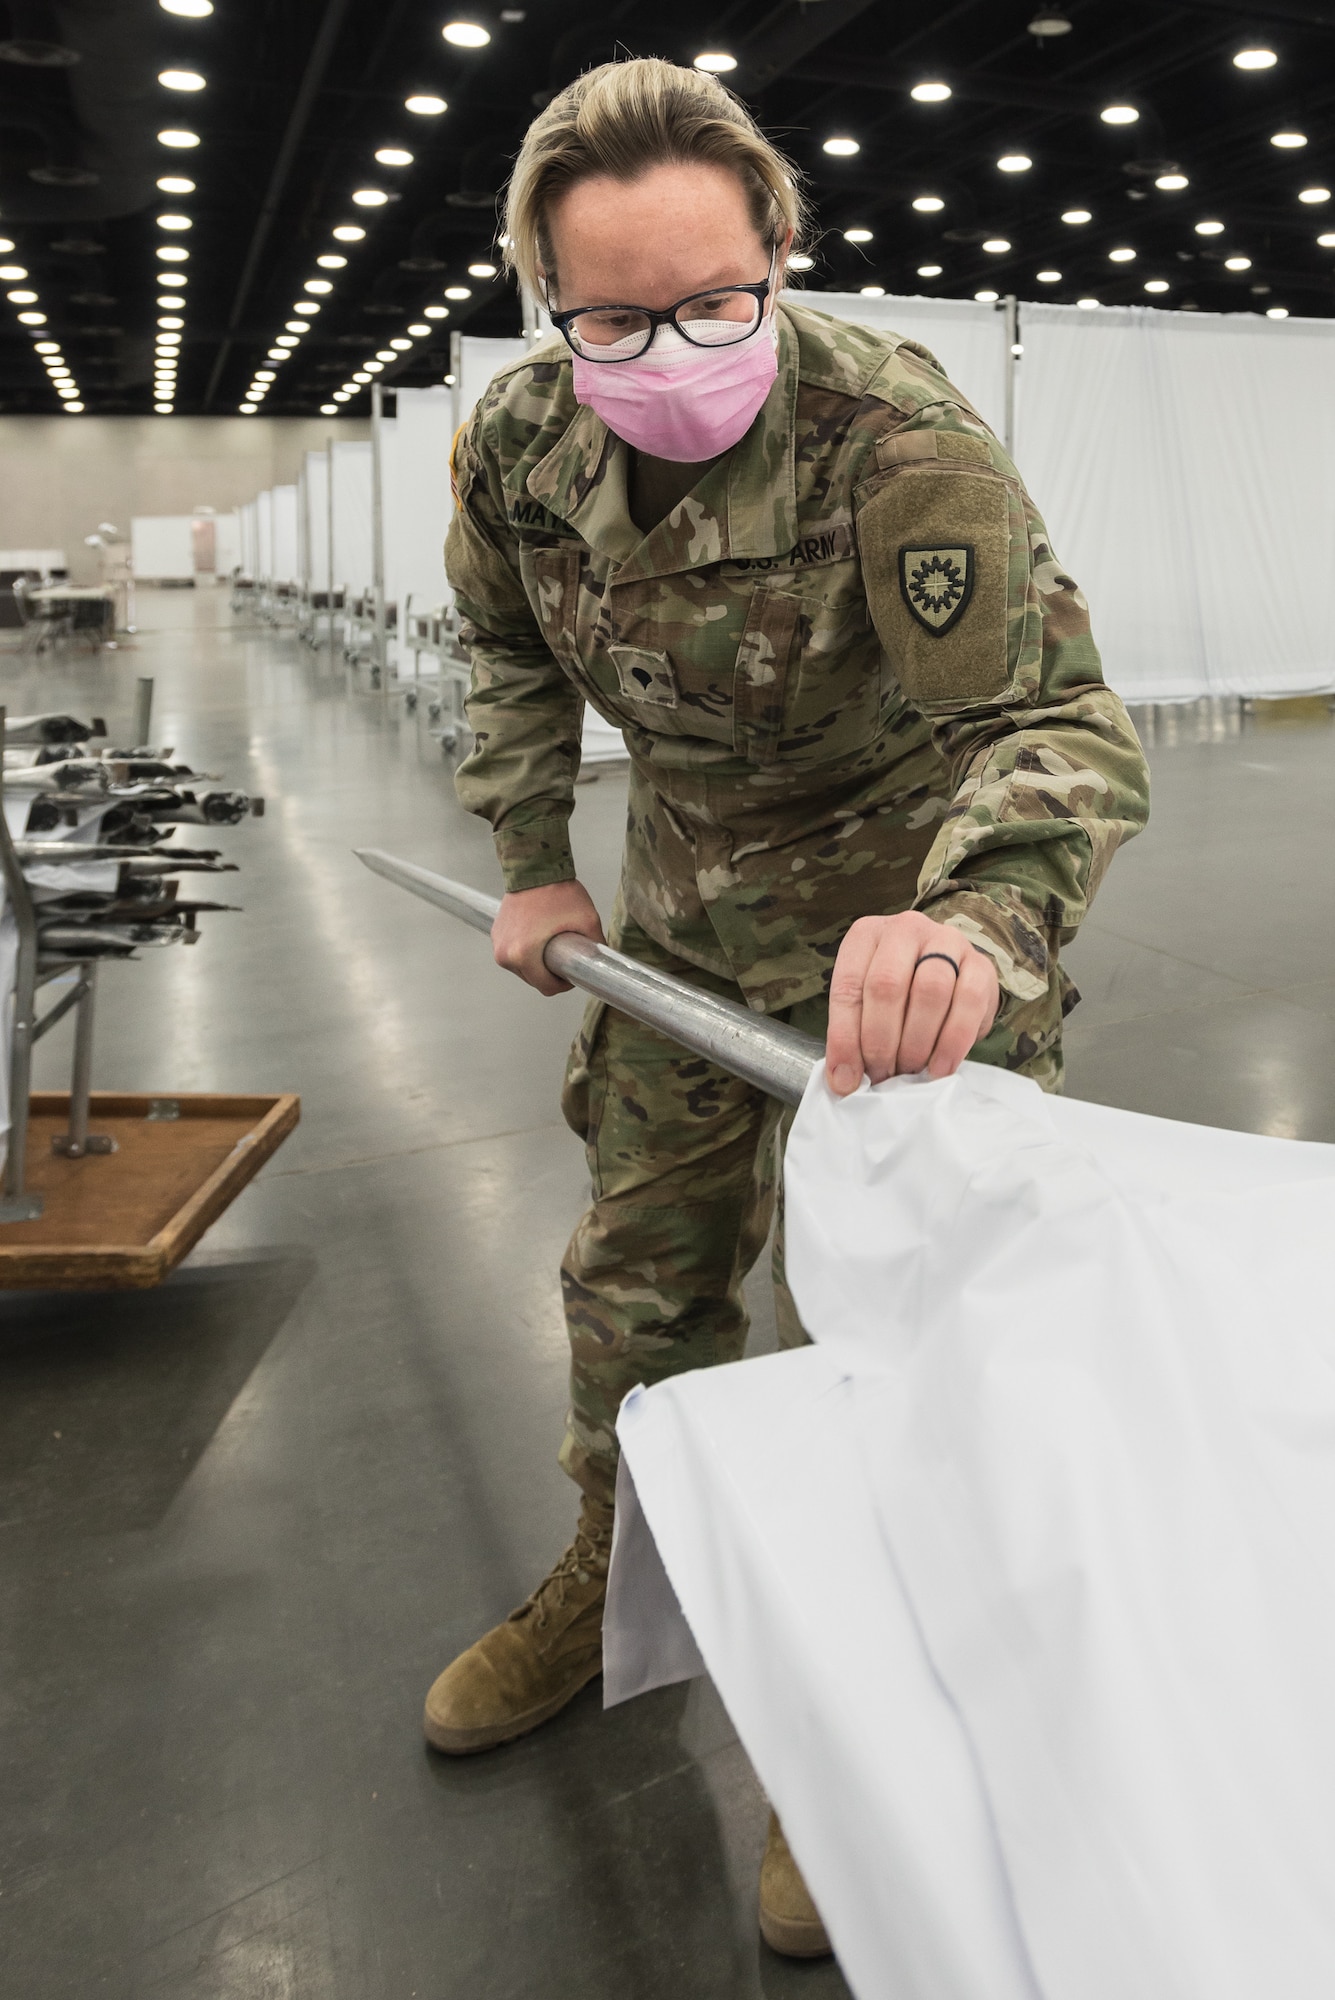 Spc. Samantha Mays of the Kentucky Army National Guard’s 103rd Chemical Battalion sets up vinyl partitions to go between hospital beds at the Kentucky Fair and Exposition Center in Louisville, Ky., April 14, 2020. The site, which is expected to be operational April 15, will serve as an Alternate Care Facility for patients suffering from COVID-19 if area hospitals exceed available capacity. The location initially can treat up to 288 patients and is scalable to 2,000 beds. (U.S. Air National Guard photo by Dale Greer)